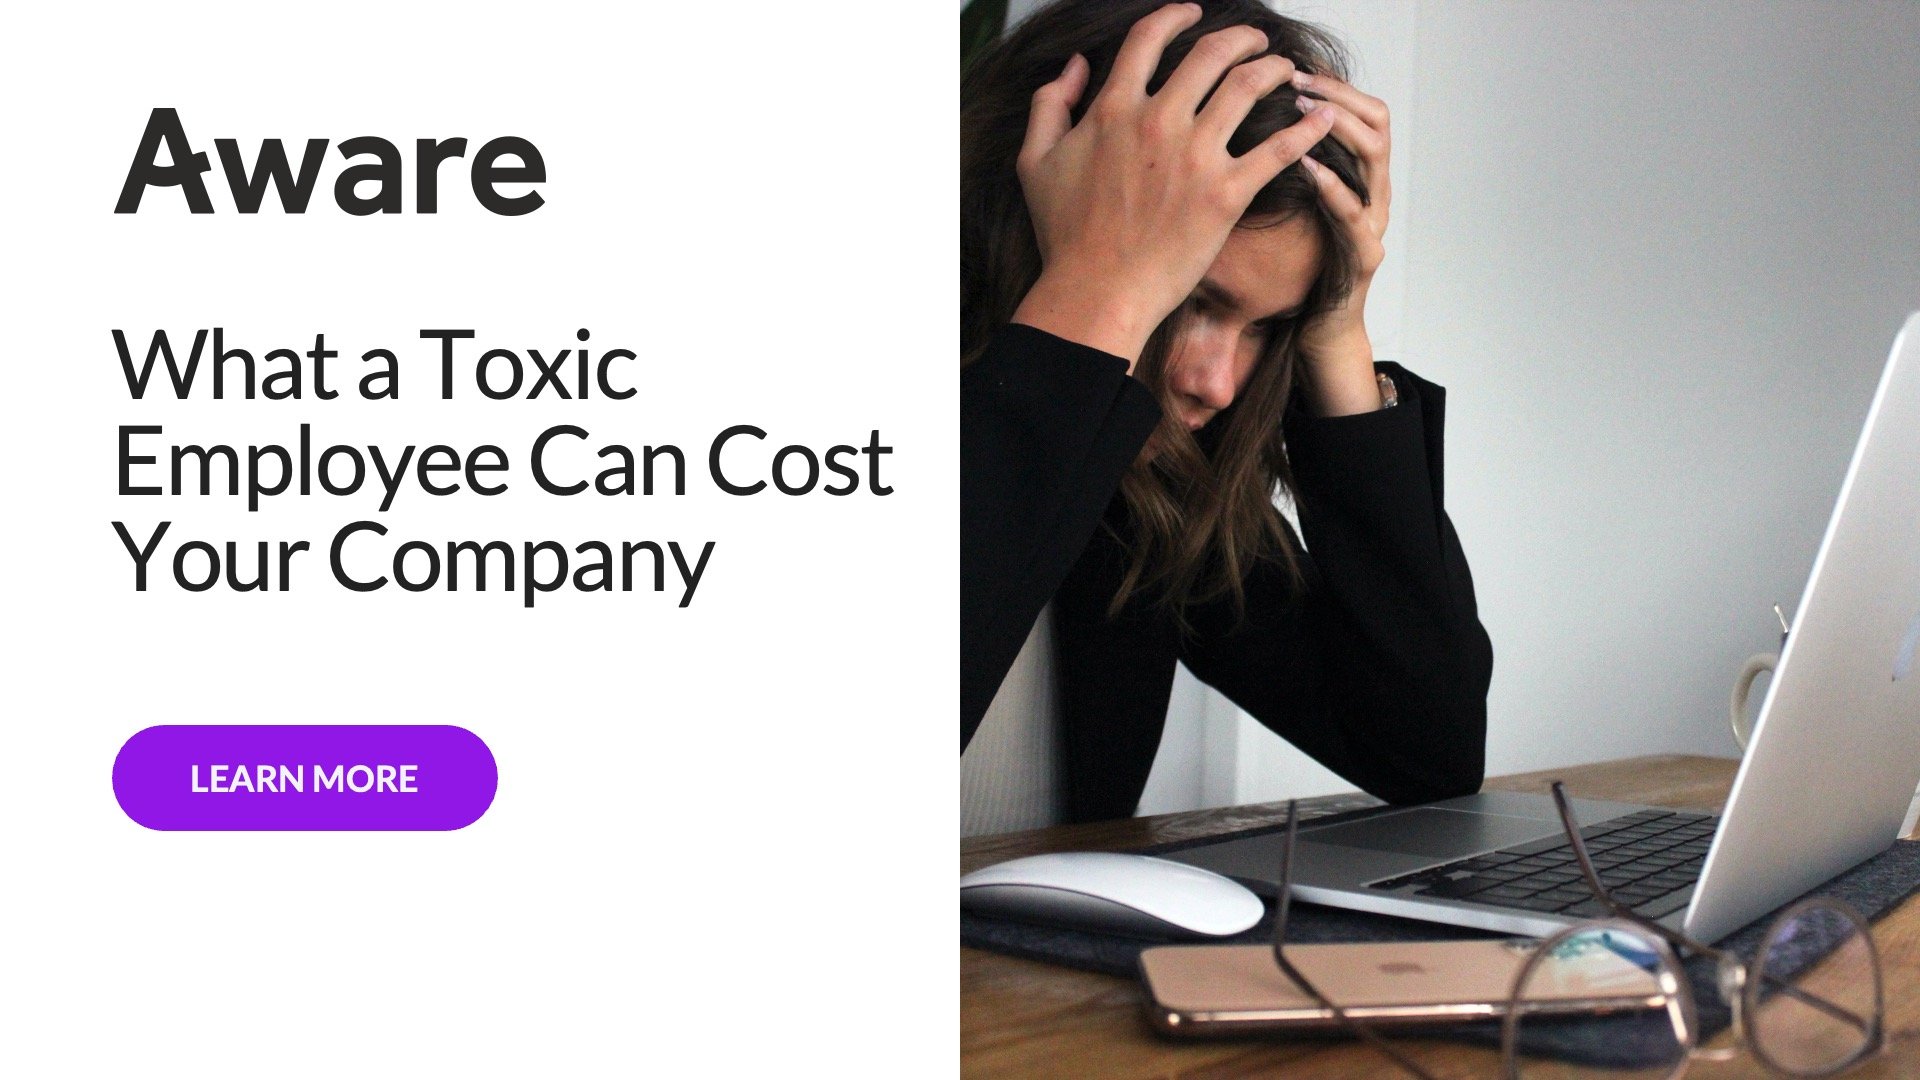 What a Toxic Employee Can Cost Your Company